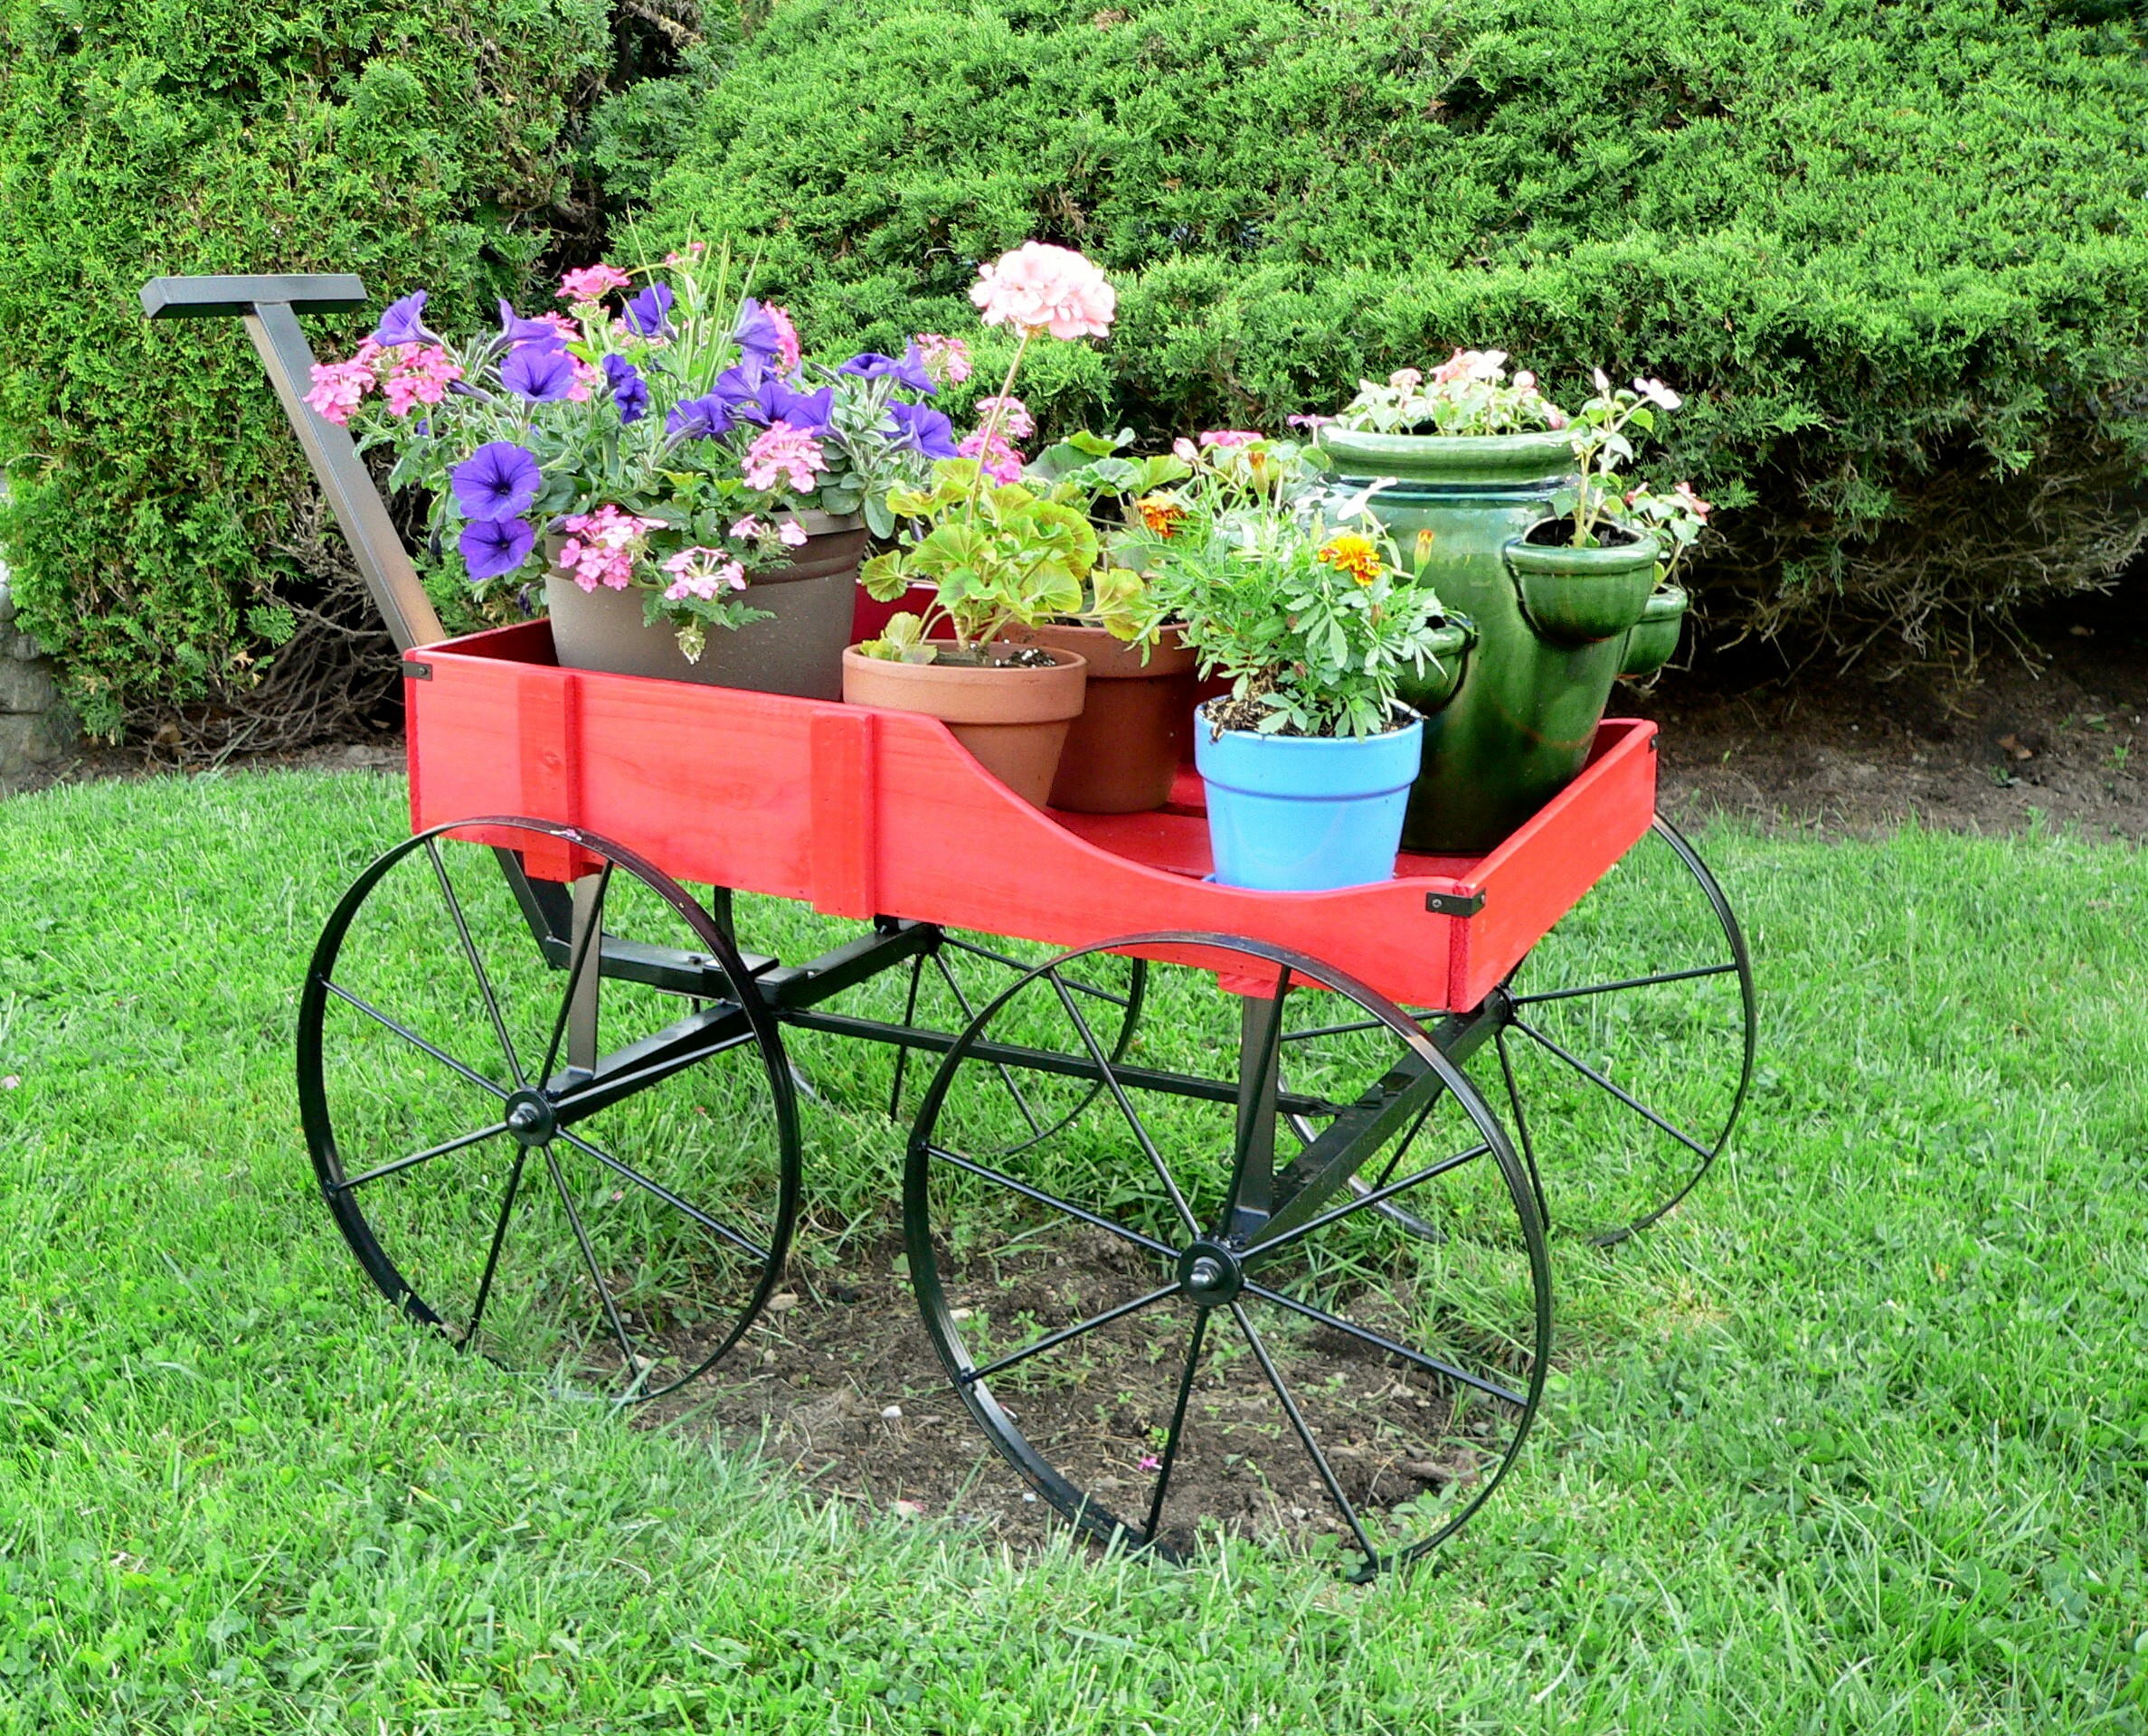 Red Wagon Planter (user submitted)